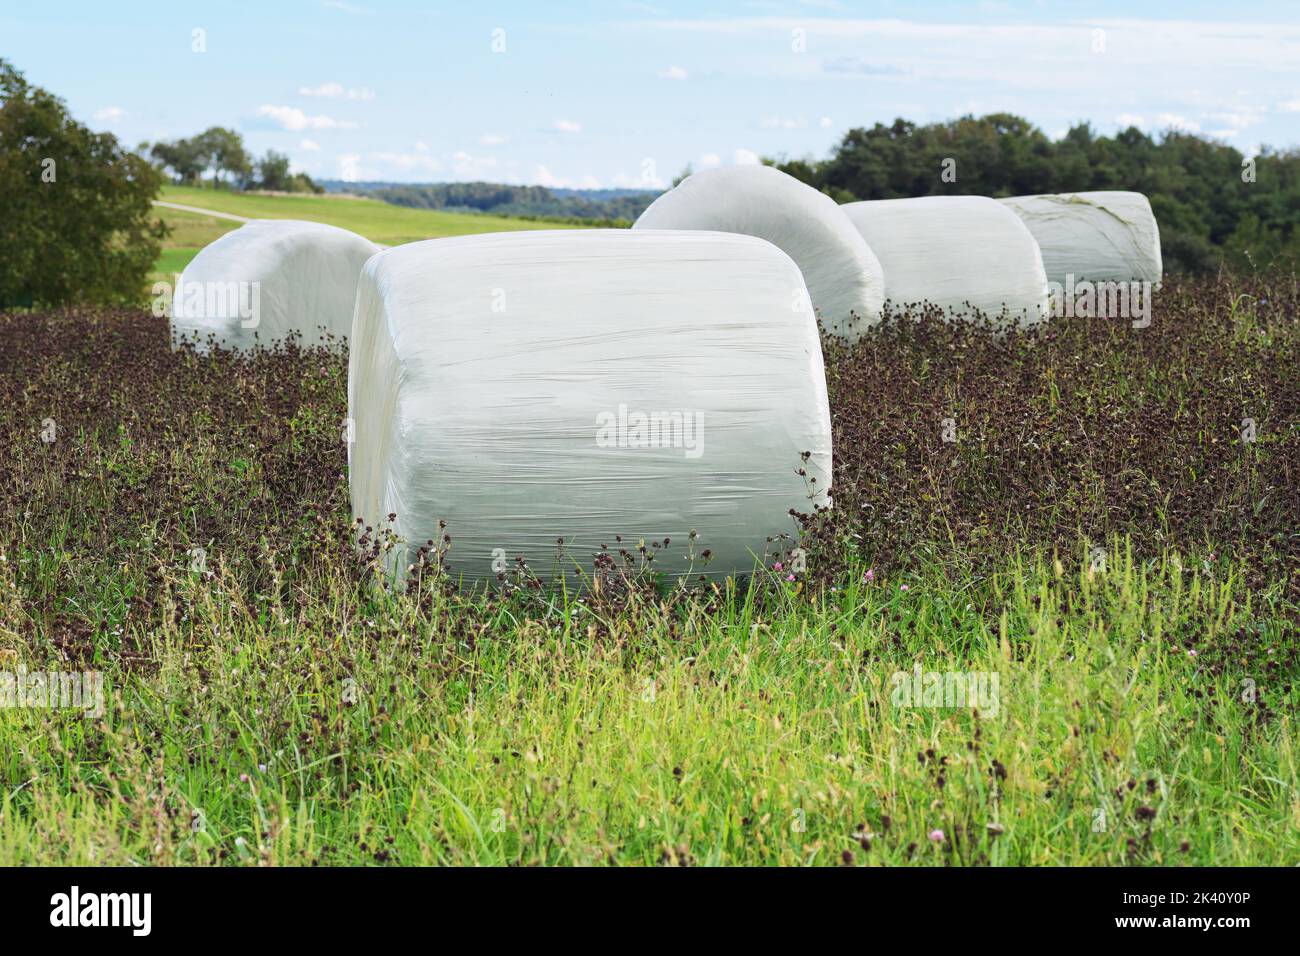 Round hay bales in plastic wrap in a lucerne field also known as alfalfa. Grazing, silage, agriculture and farming concepts Stock Photo